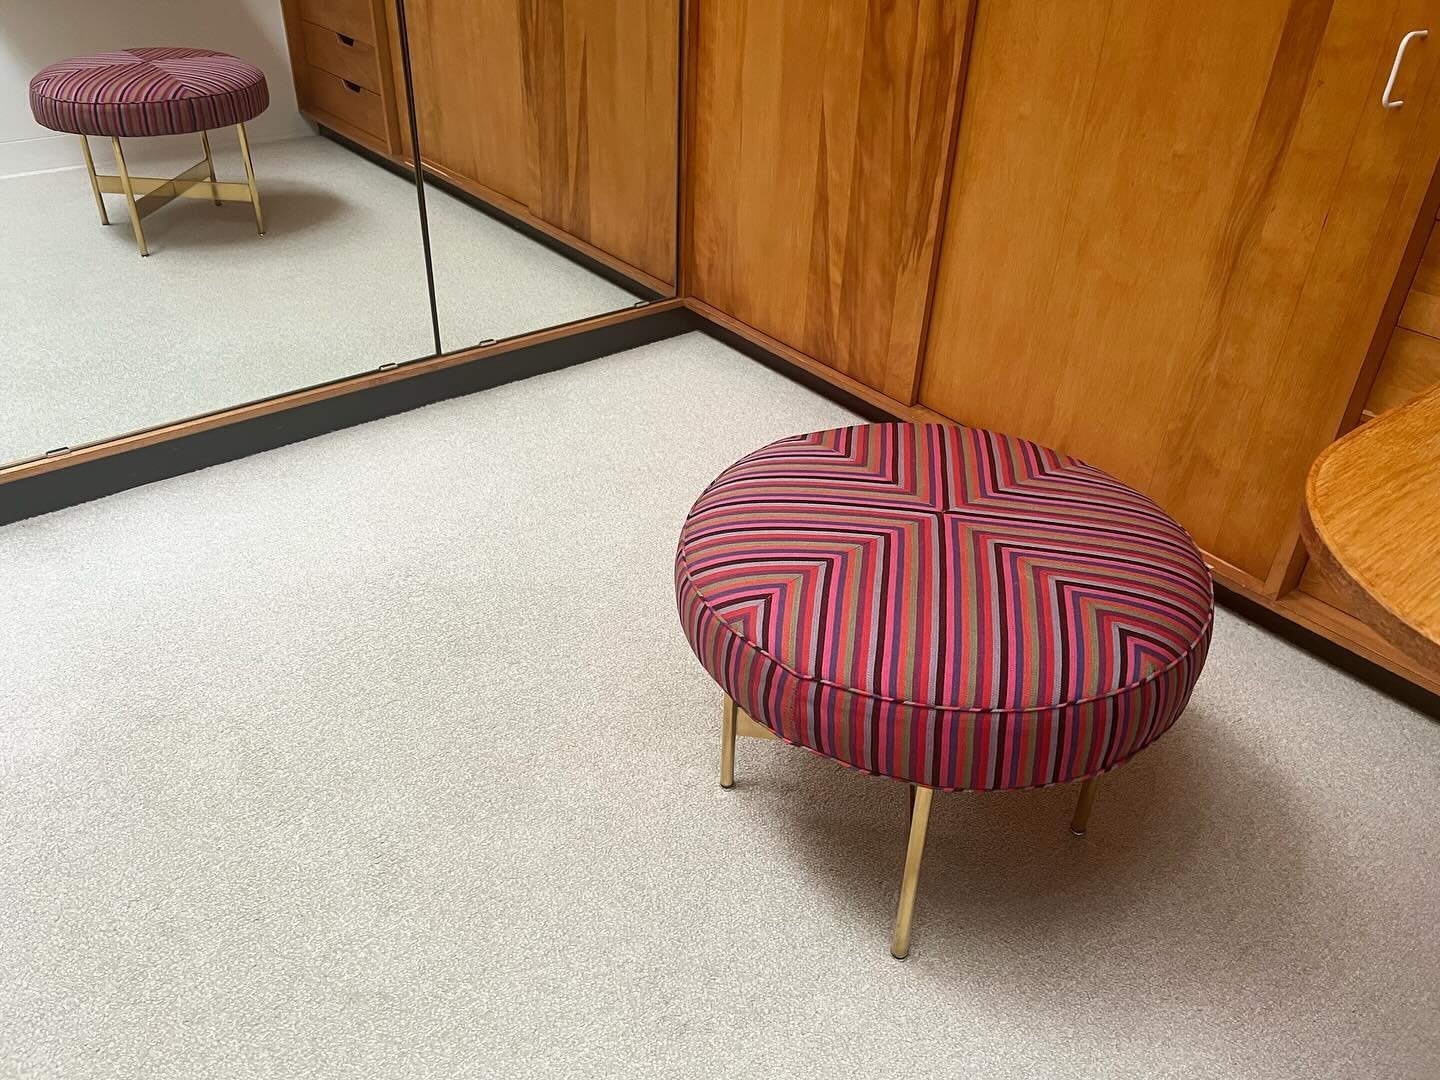 An incredible vanity stool by Alexander Girard in polished and lacquered brass with AG upholstery in Xenia Miller&rsquo;s dressing room at The Miller House in @columbusindiana w/ @blwever